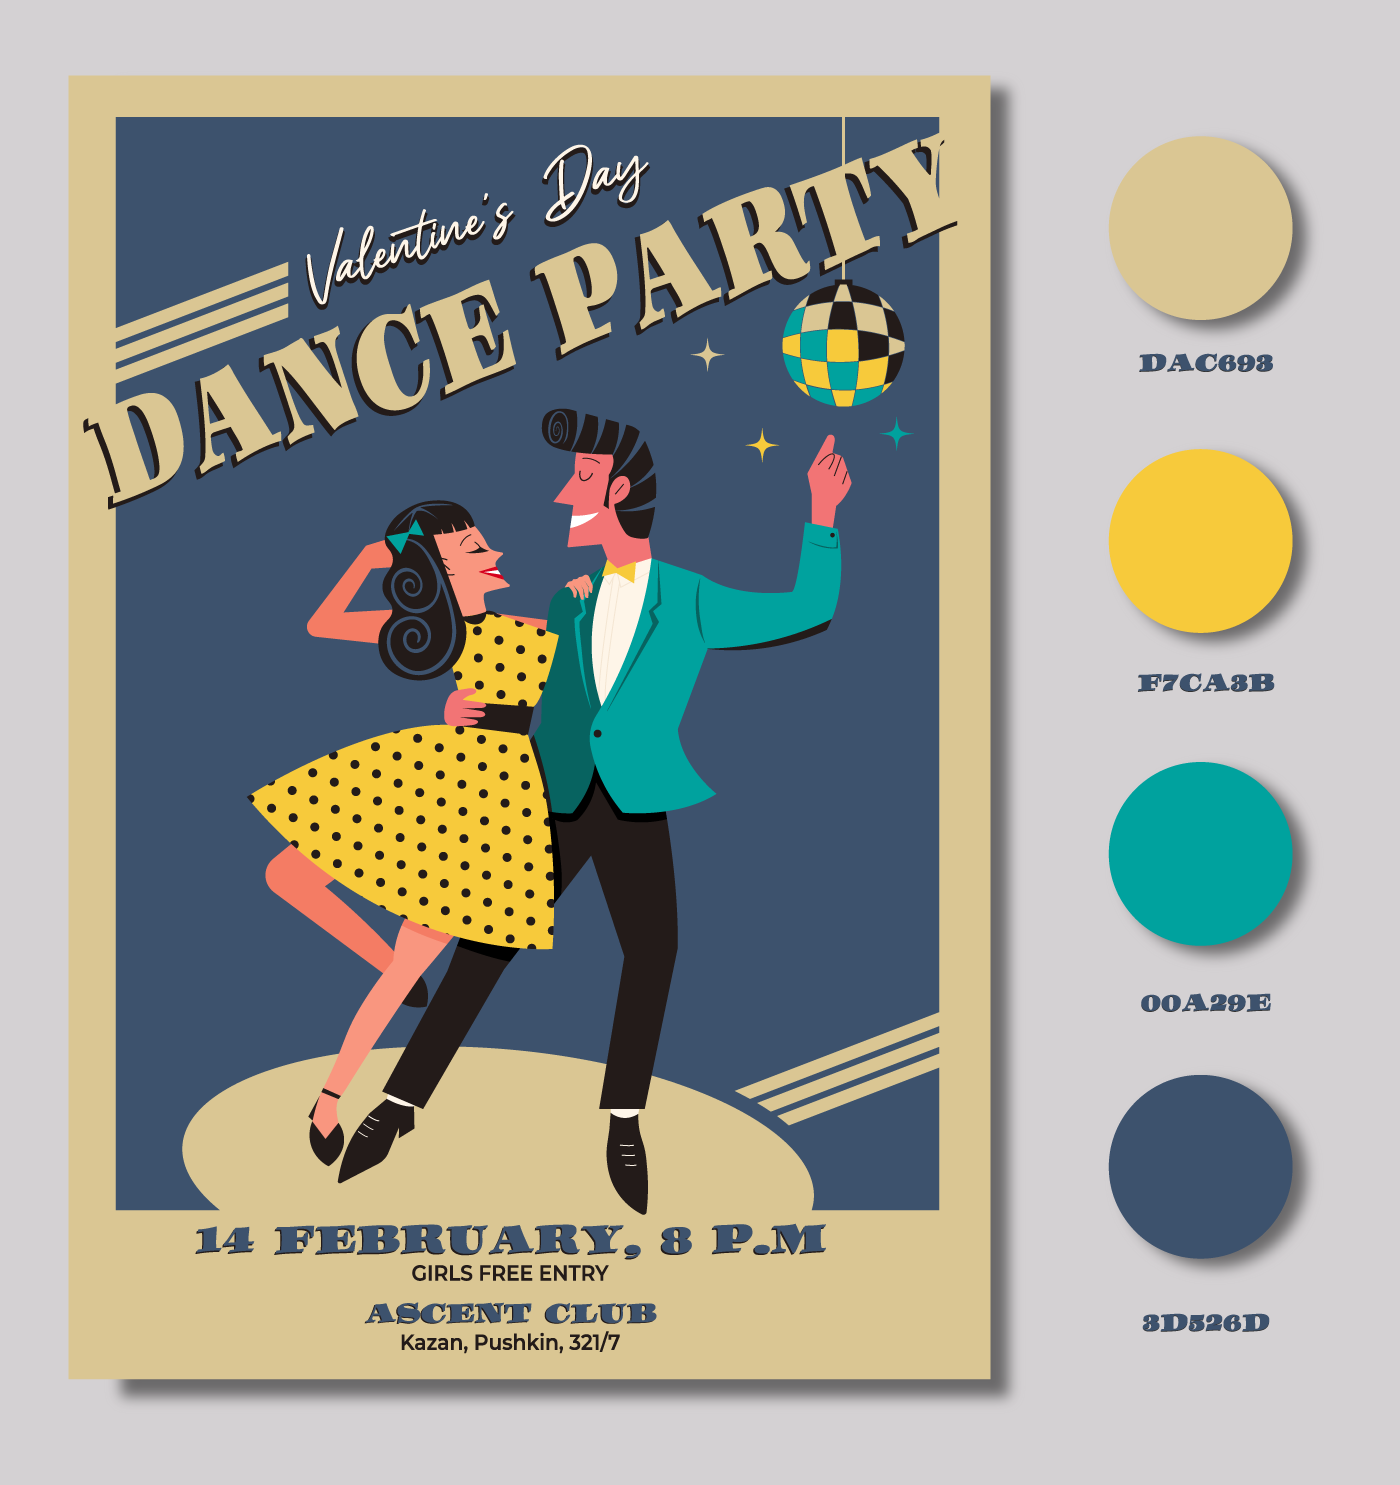 RETRO STYLE POSTER FOR A NIGHTCLUB